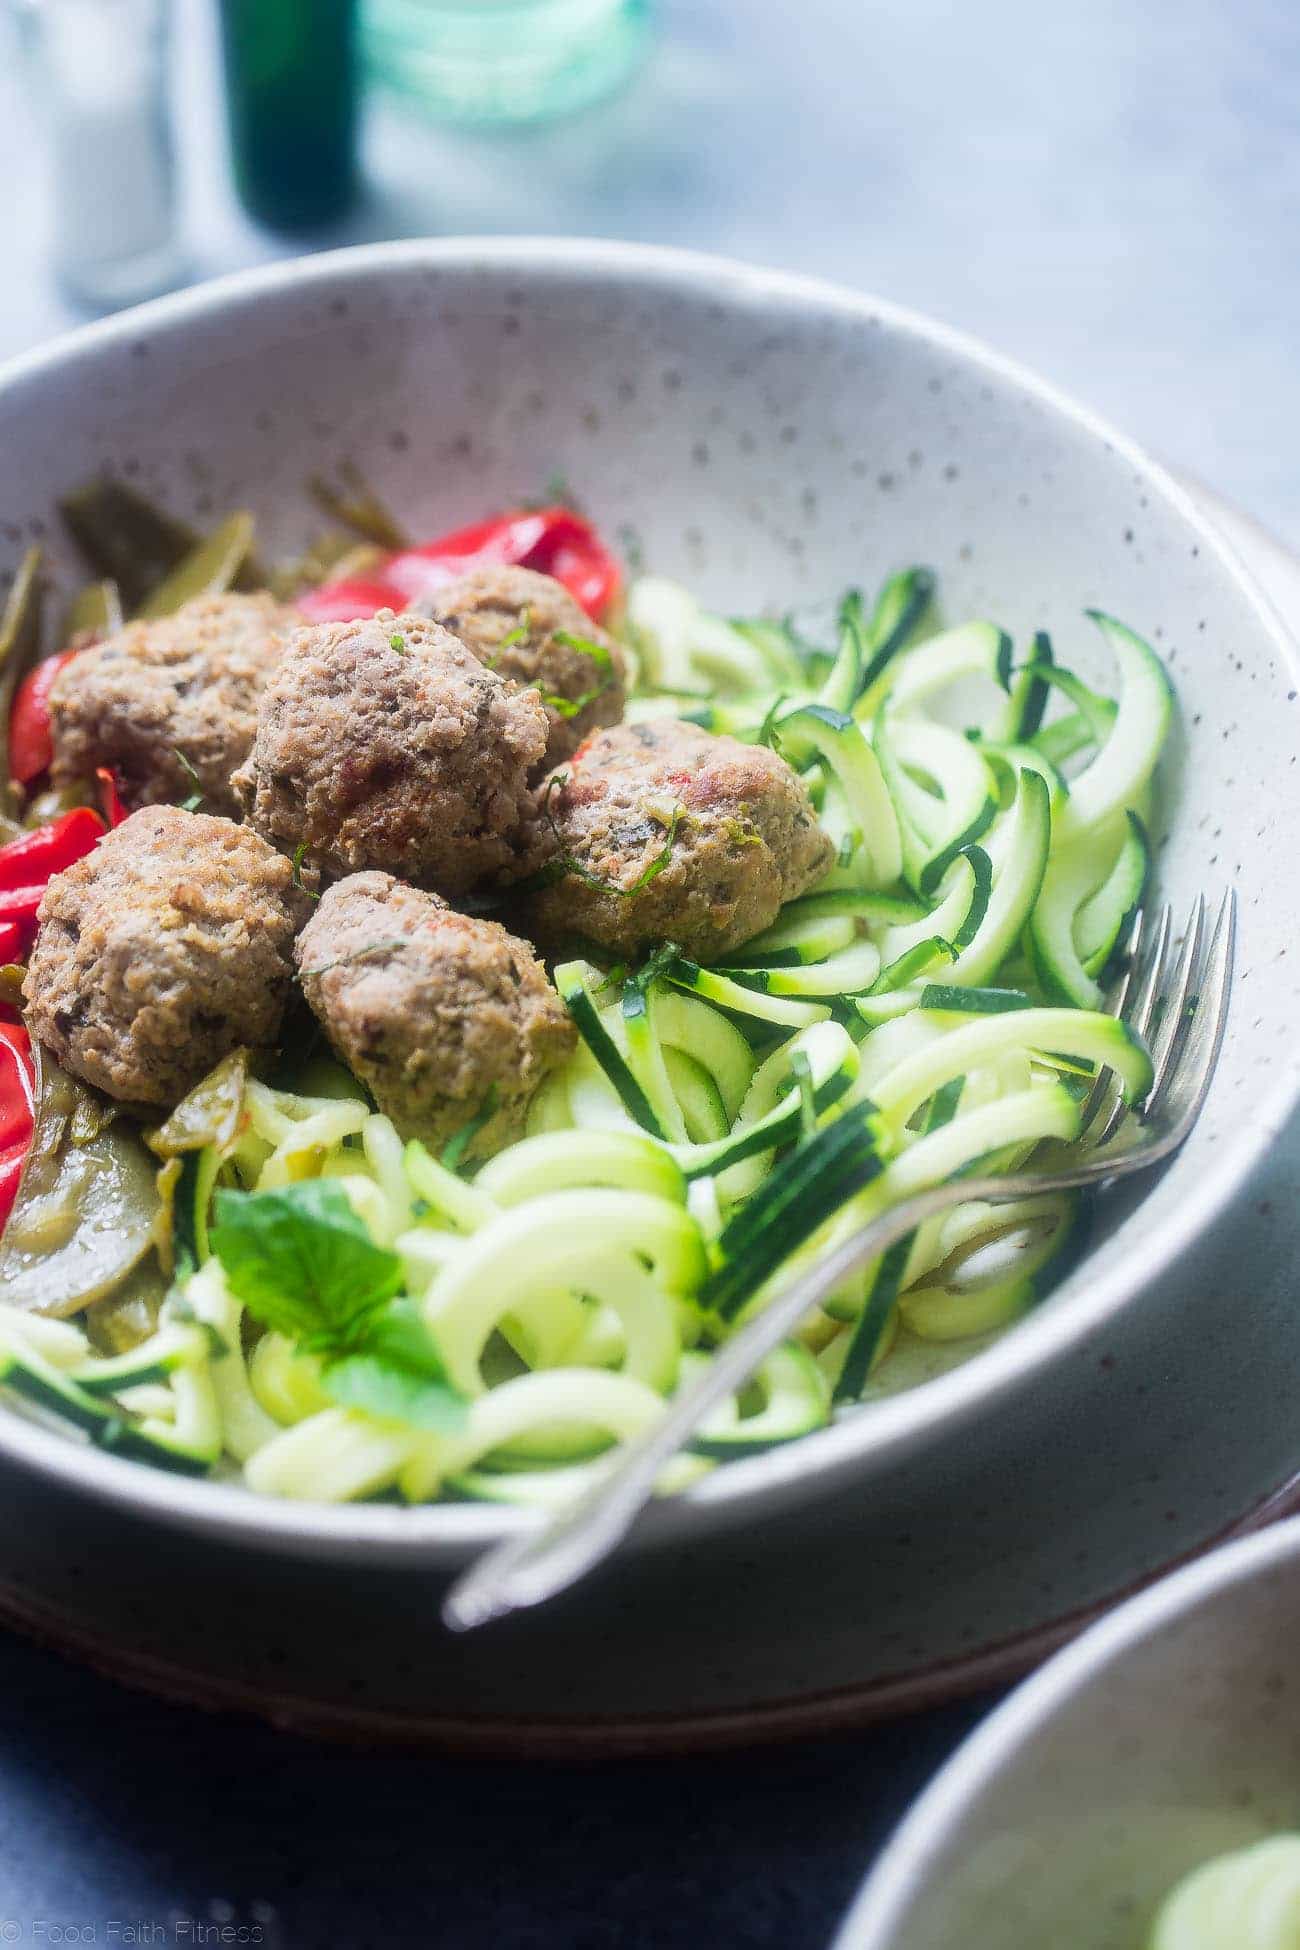 Whole30 Instant Pot Meatballs Primavera - These paleo chicken meatballs taste like pasta primavera! They're a healthy, gluten free and paleo spring meal for only 300 calories! | Foodfaithfitness.com | @FoodFaithFit